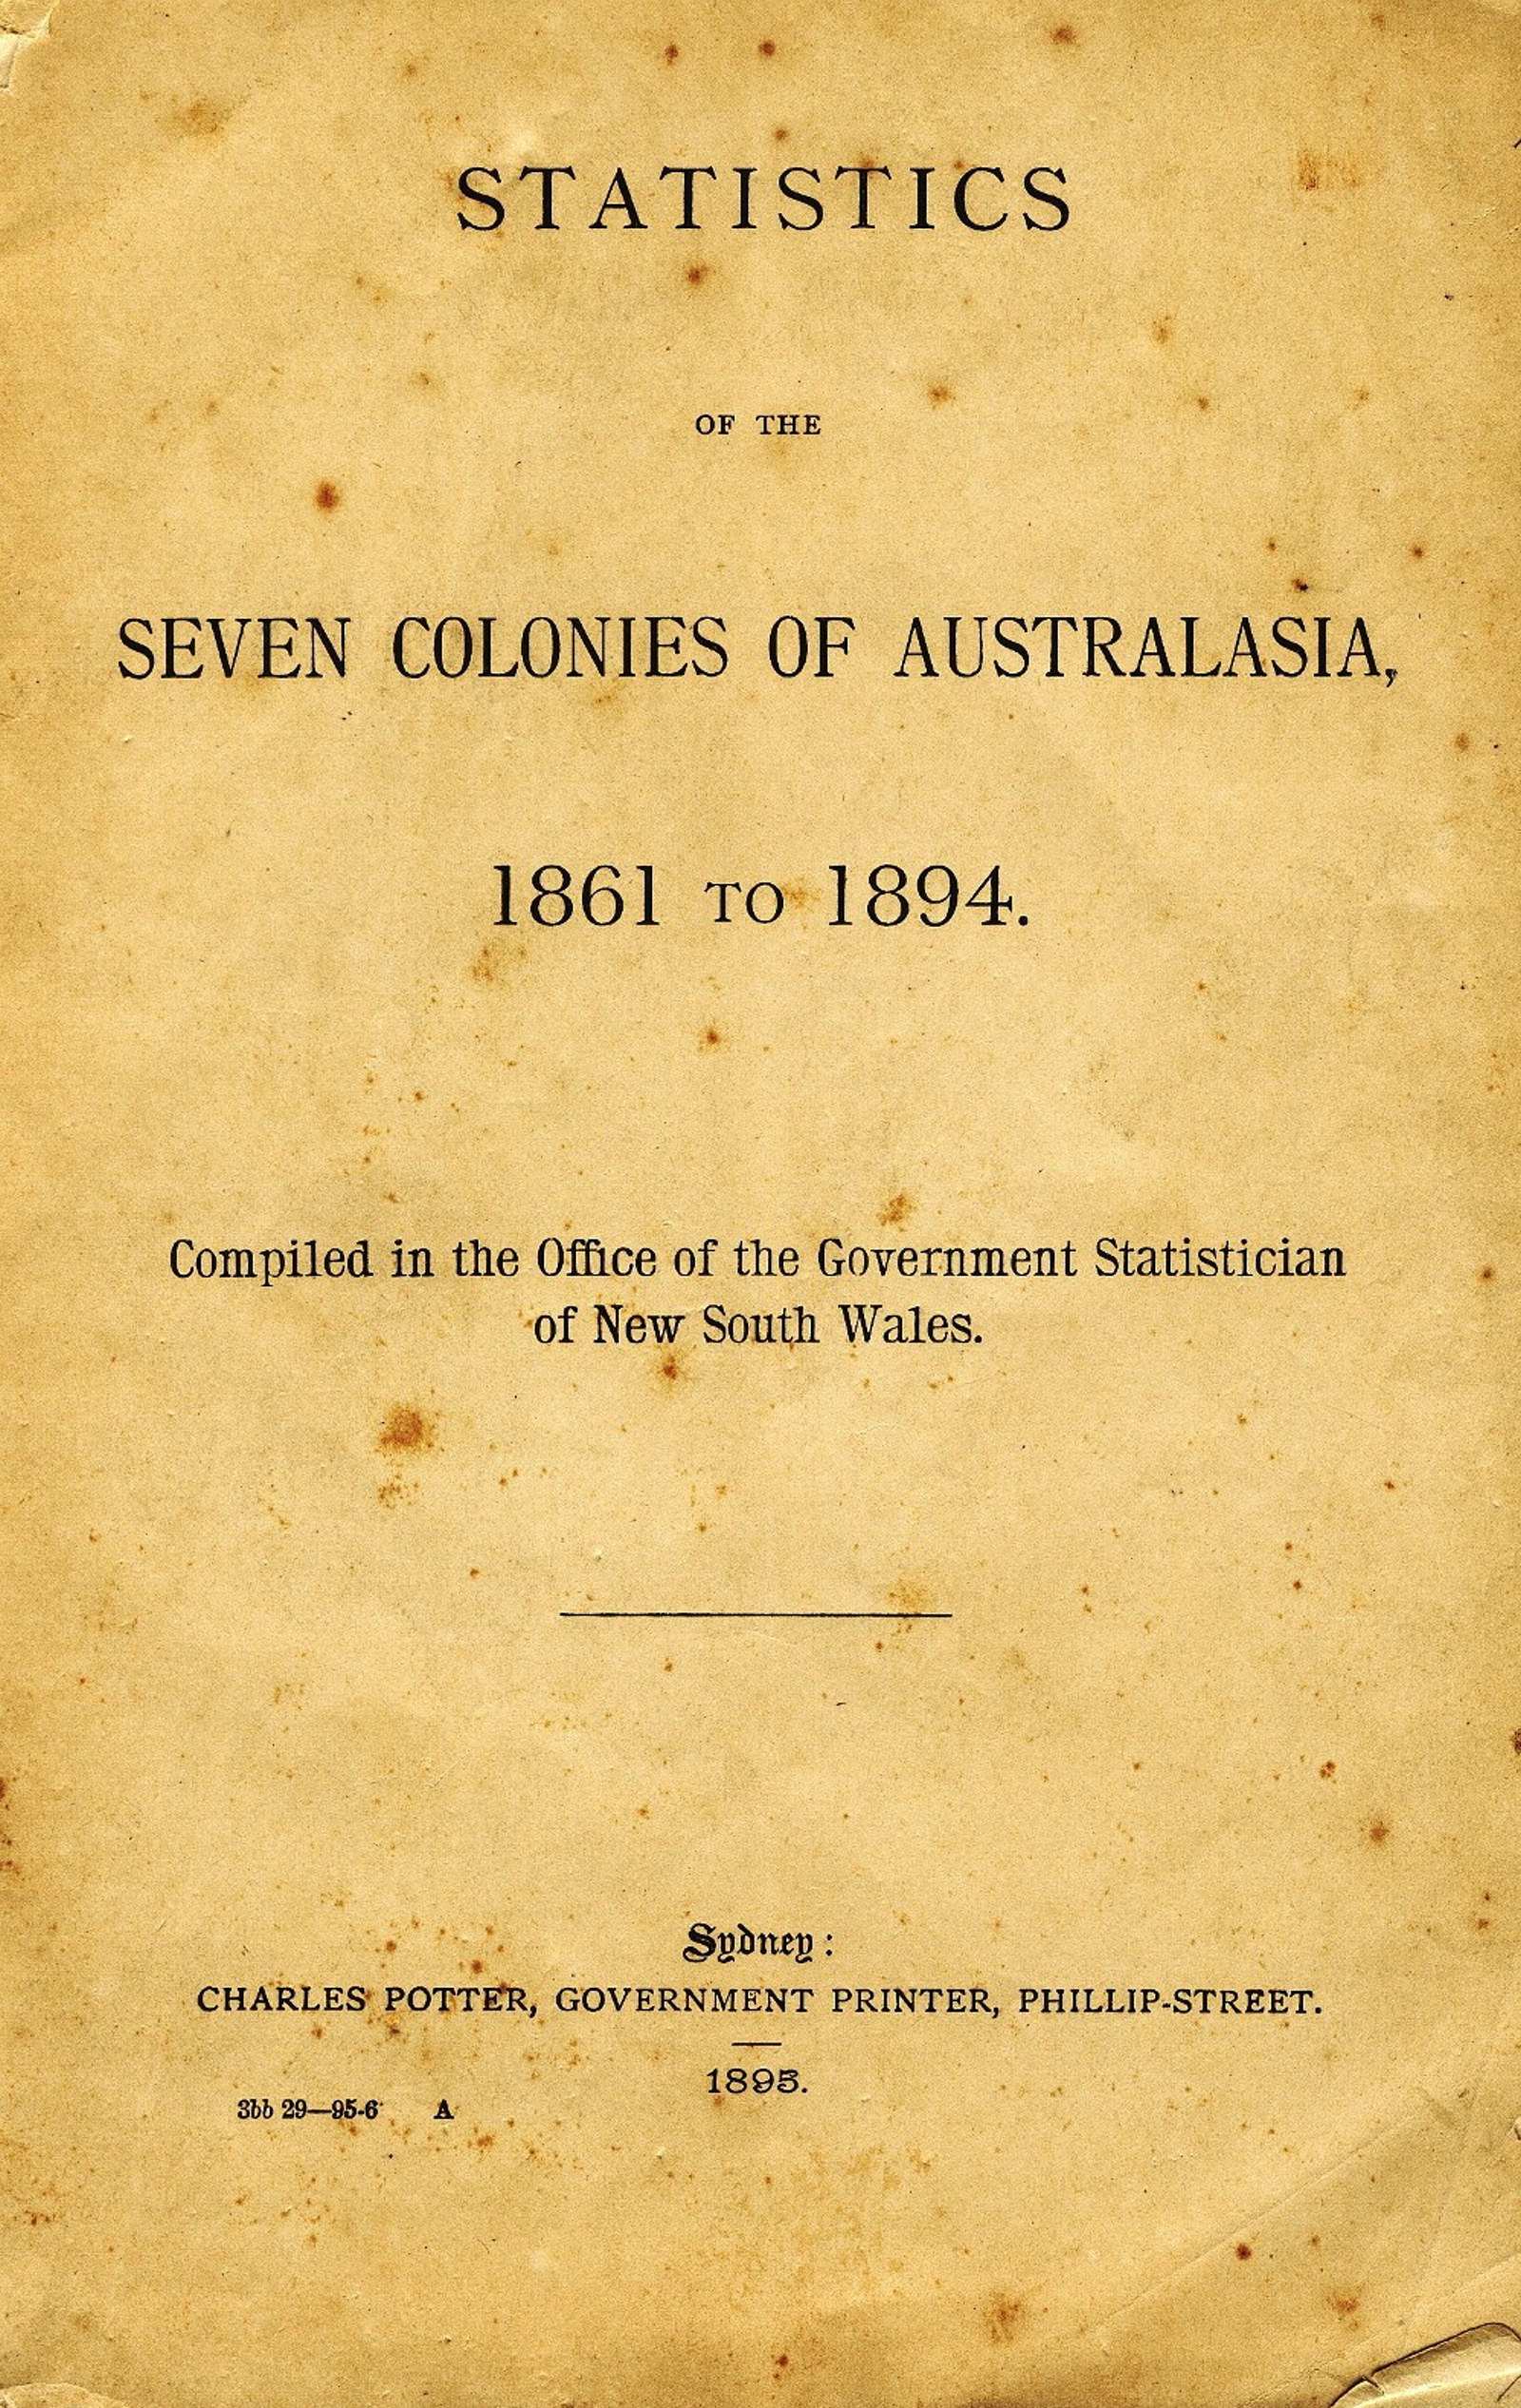 https://www.records.nsw.gov.au/sites/default/files/styles/juicebox_square_thumbnail/public/Collection/New%20Zealand/698_6_5601_7Colonies_cover.jpg?itok=aAhSiL86